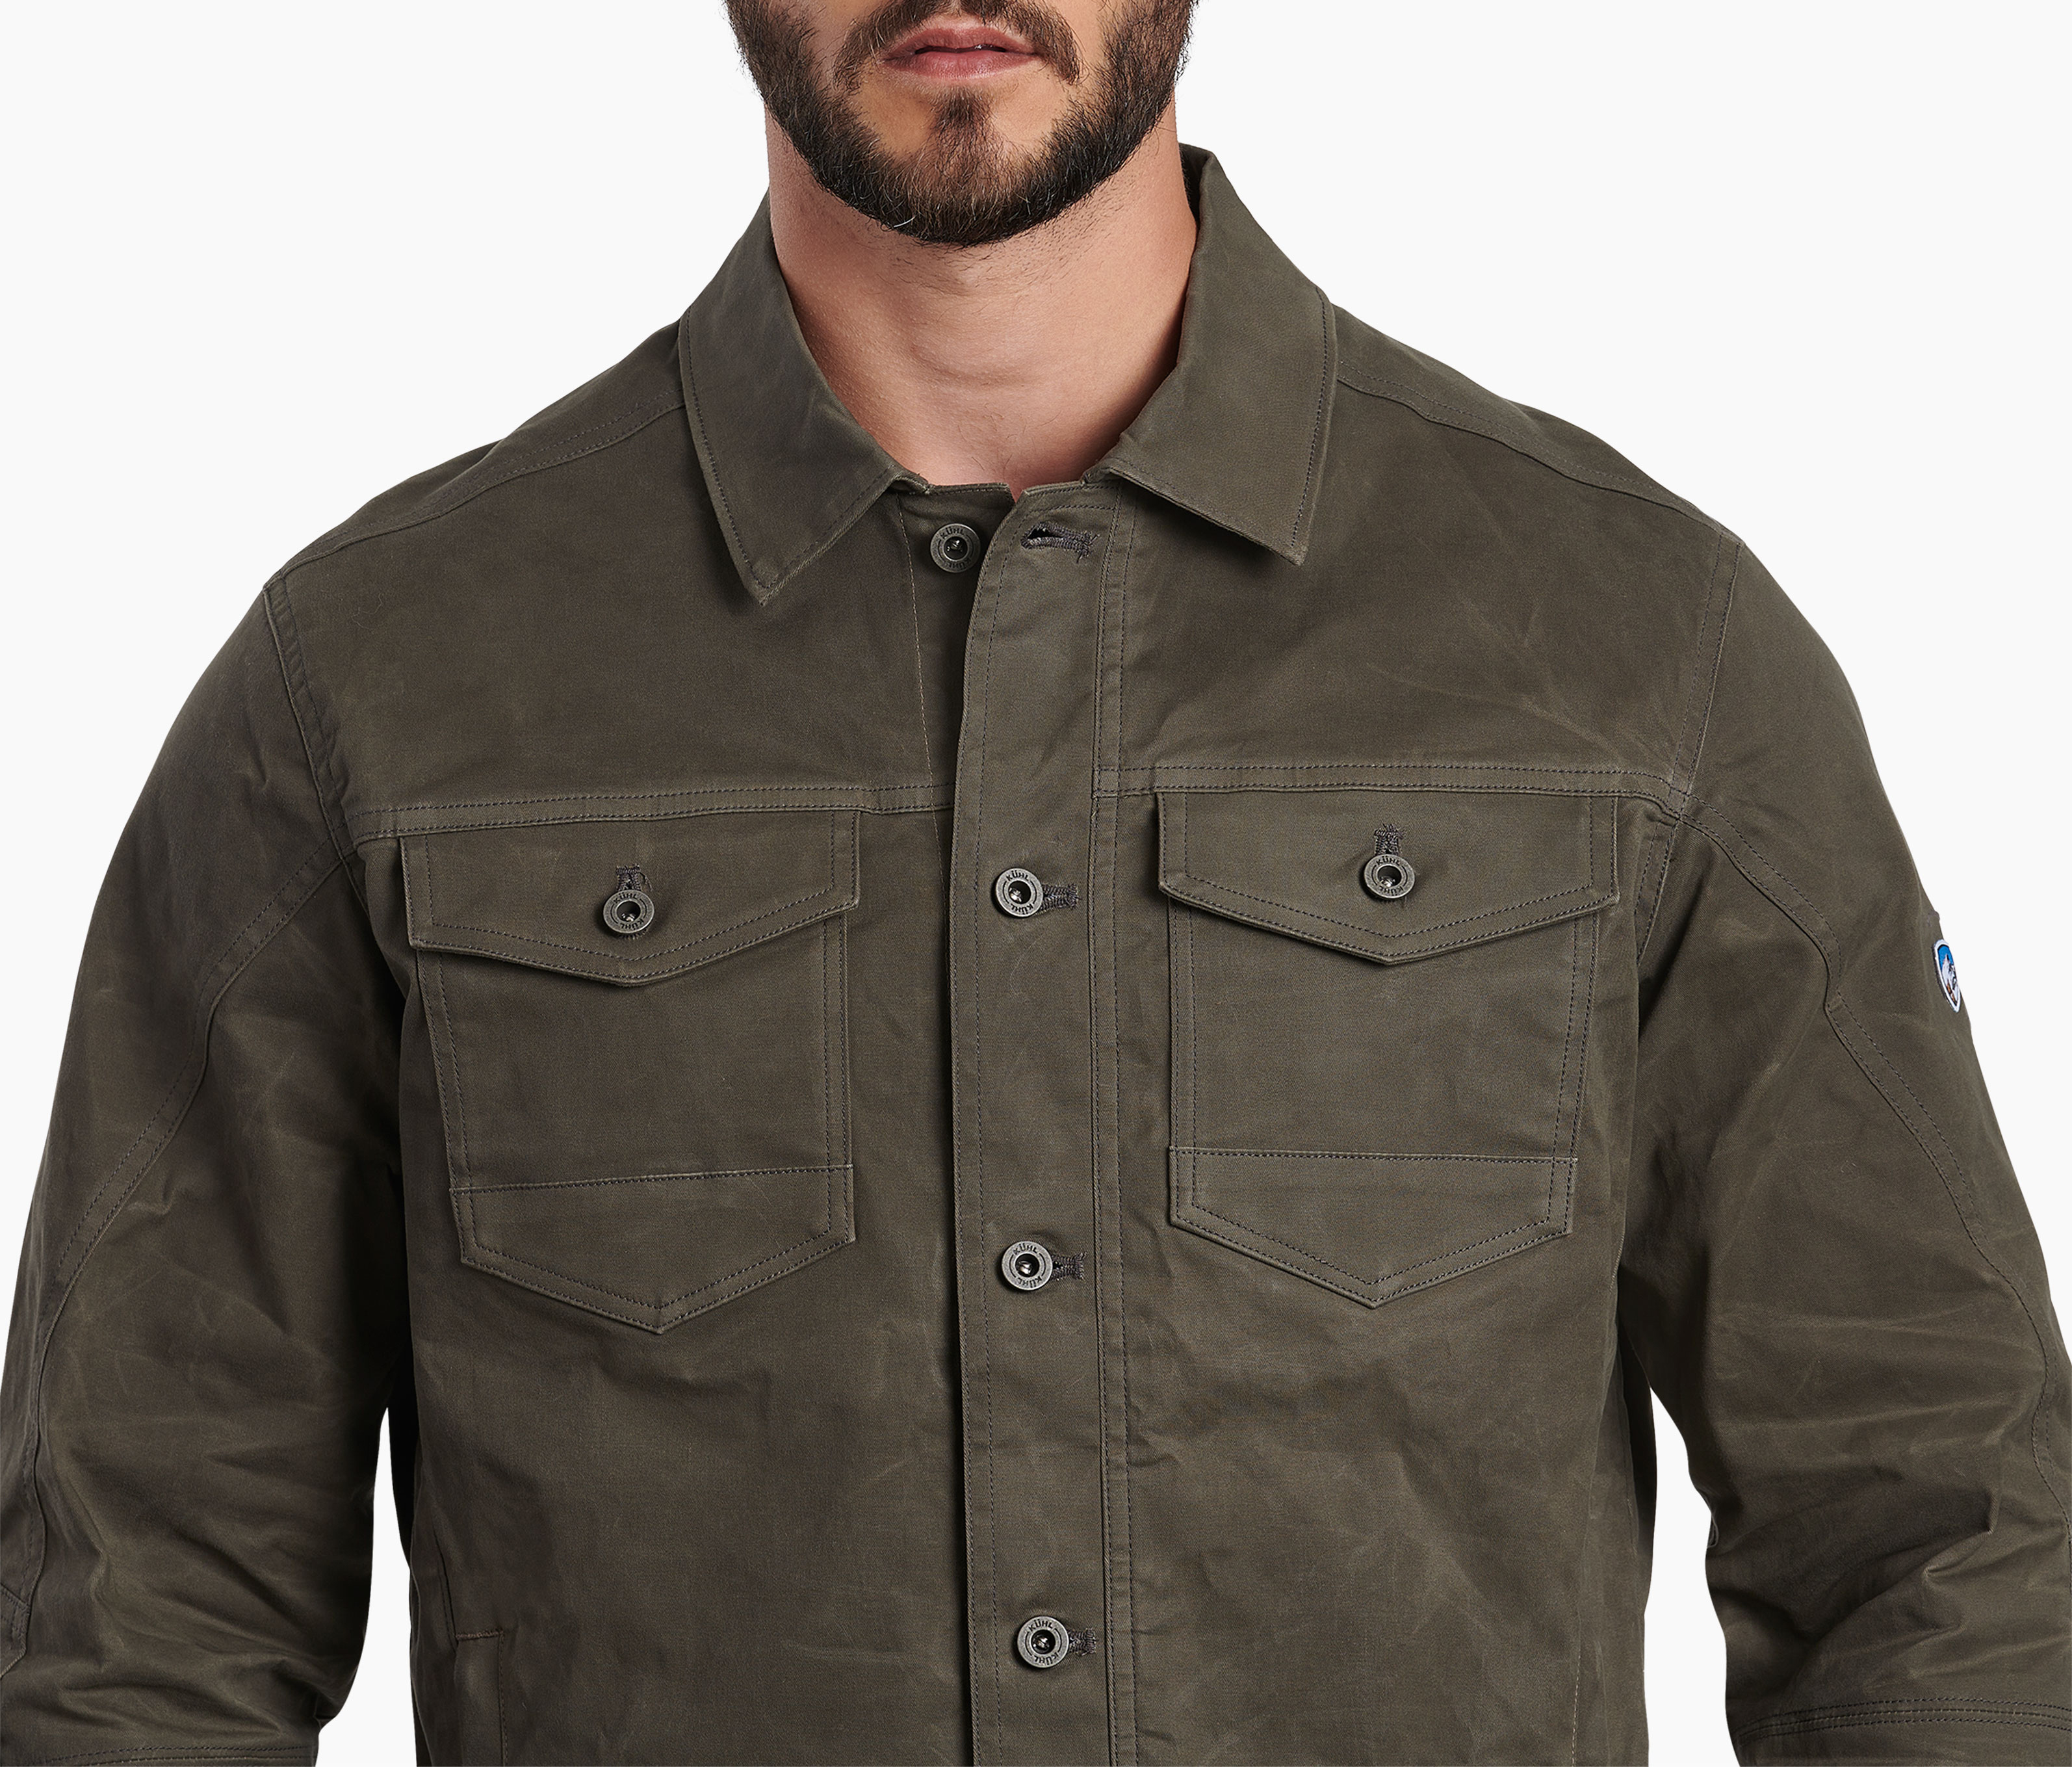 The Outlaw™ Waxed Jacket in Men's Outerwear